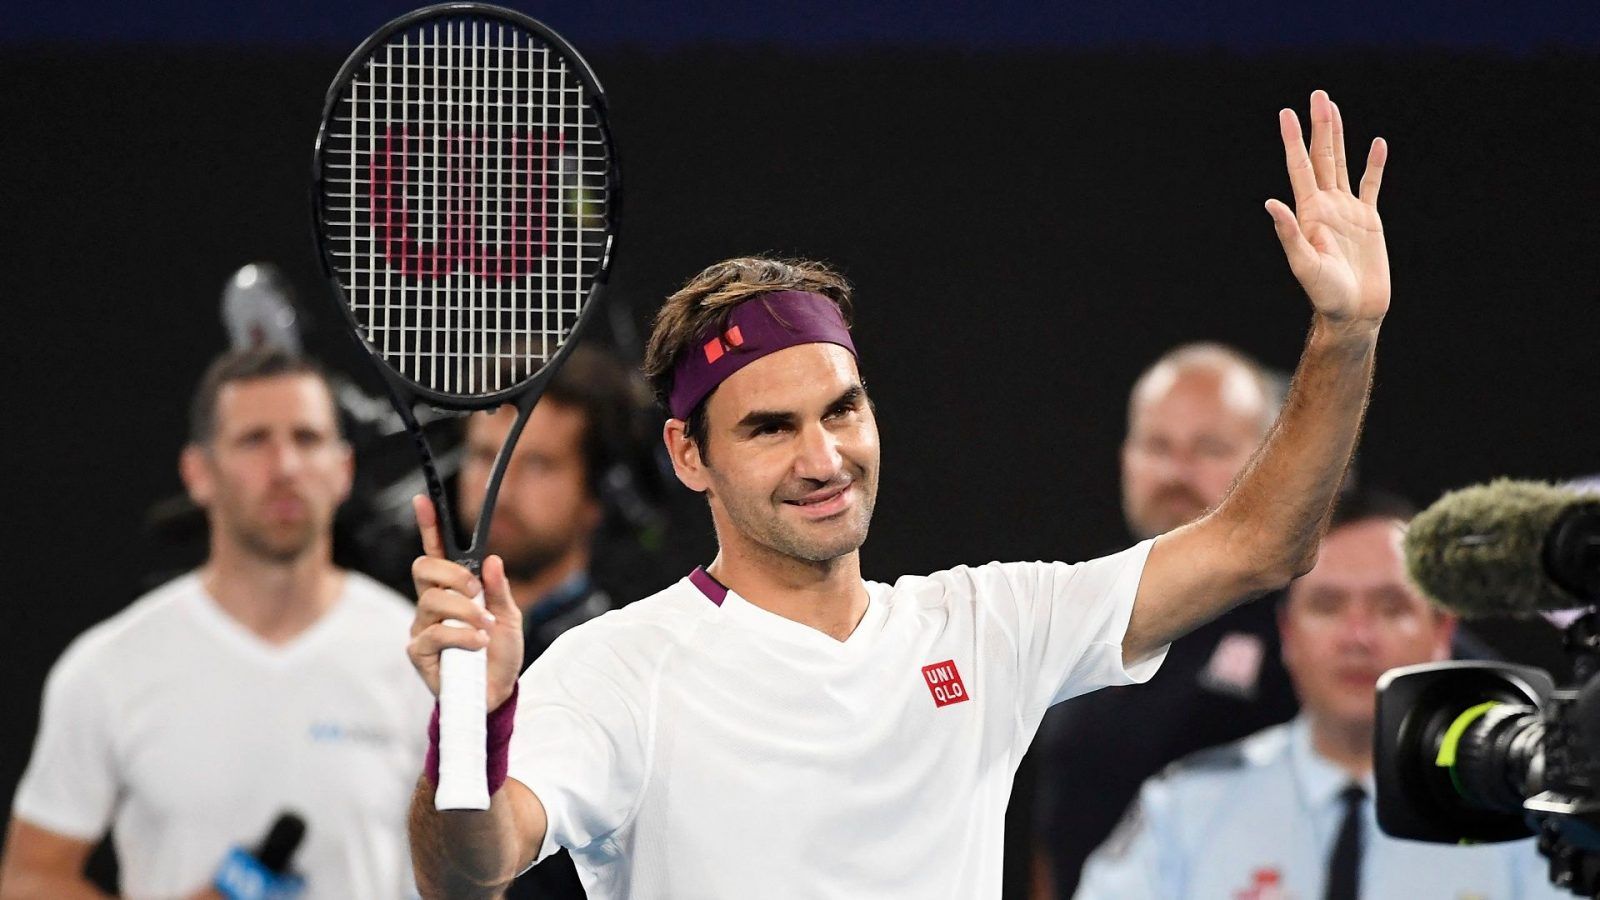 As Roger Federer Retires, a Look at His Historic Career Achievements